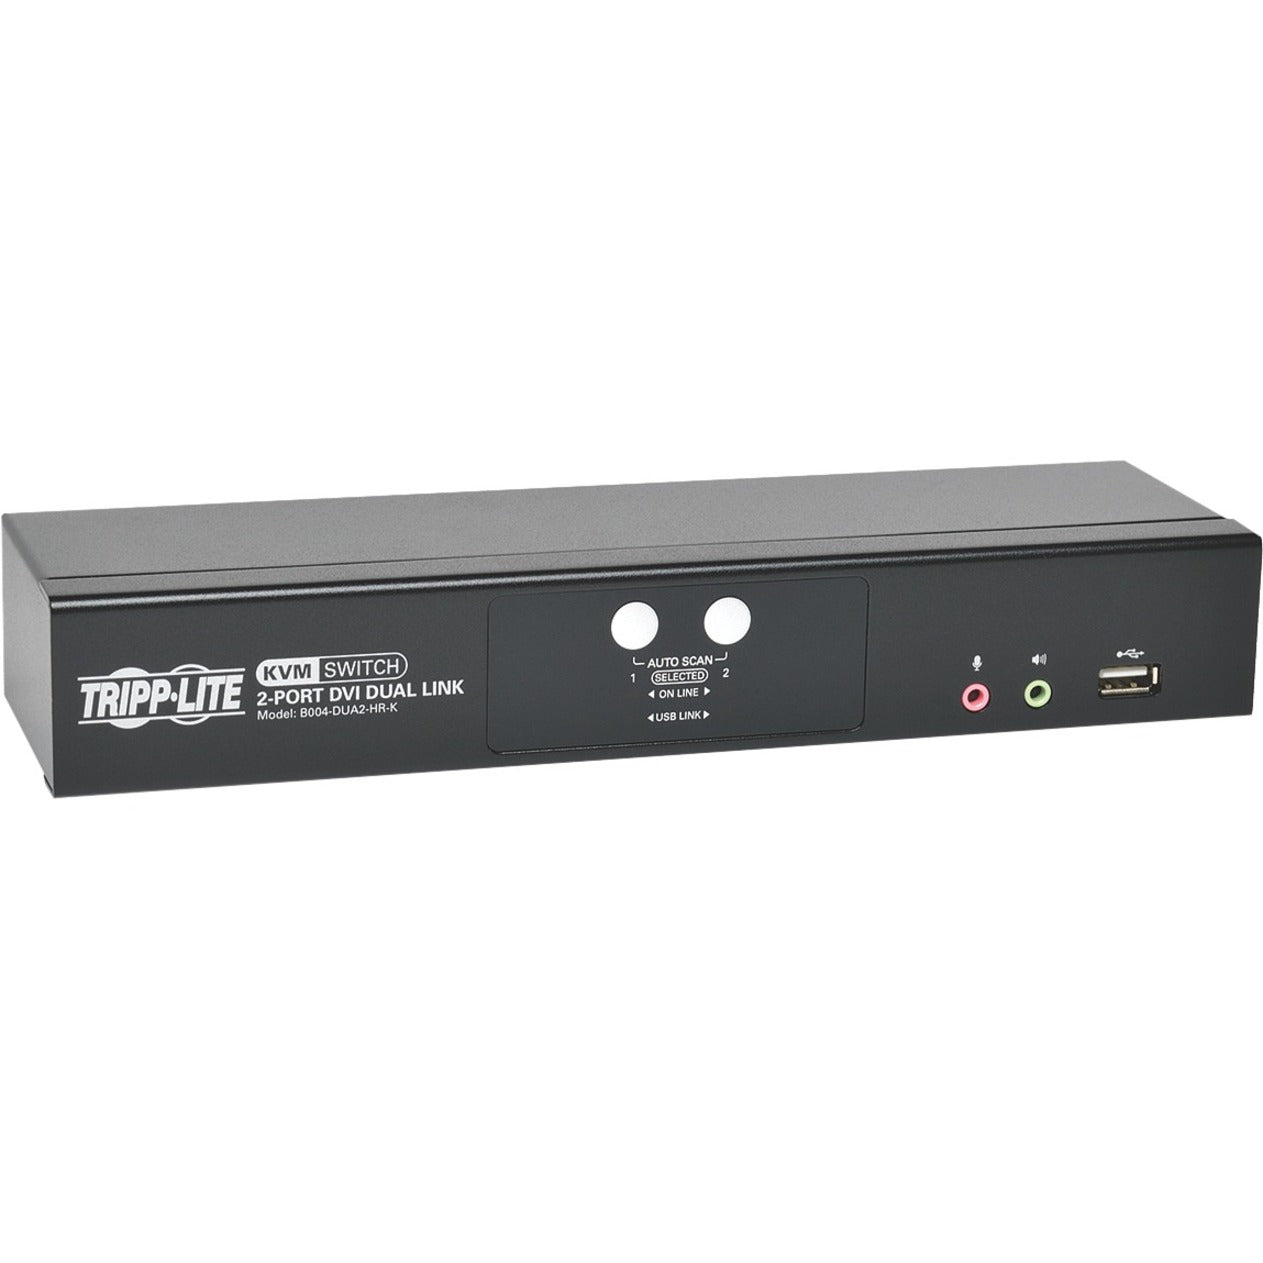 Tripp Lite B004-DUA2-HR-K 2-Port DVI Dual-Link / USB KVM Switch with Audio and Cables WQUXGA 2560 x 1600 TAA Compliant 3 Year Warranty